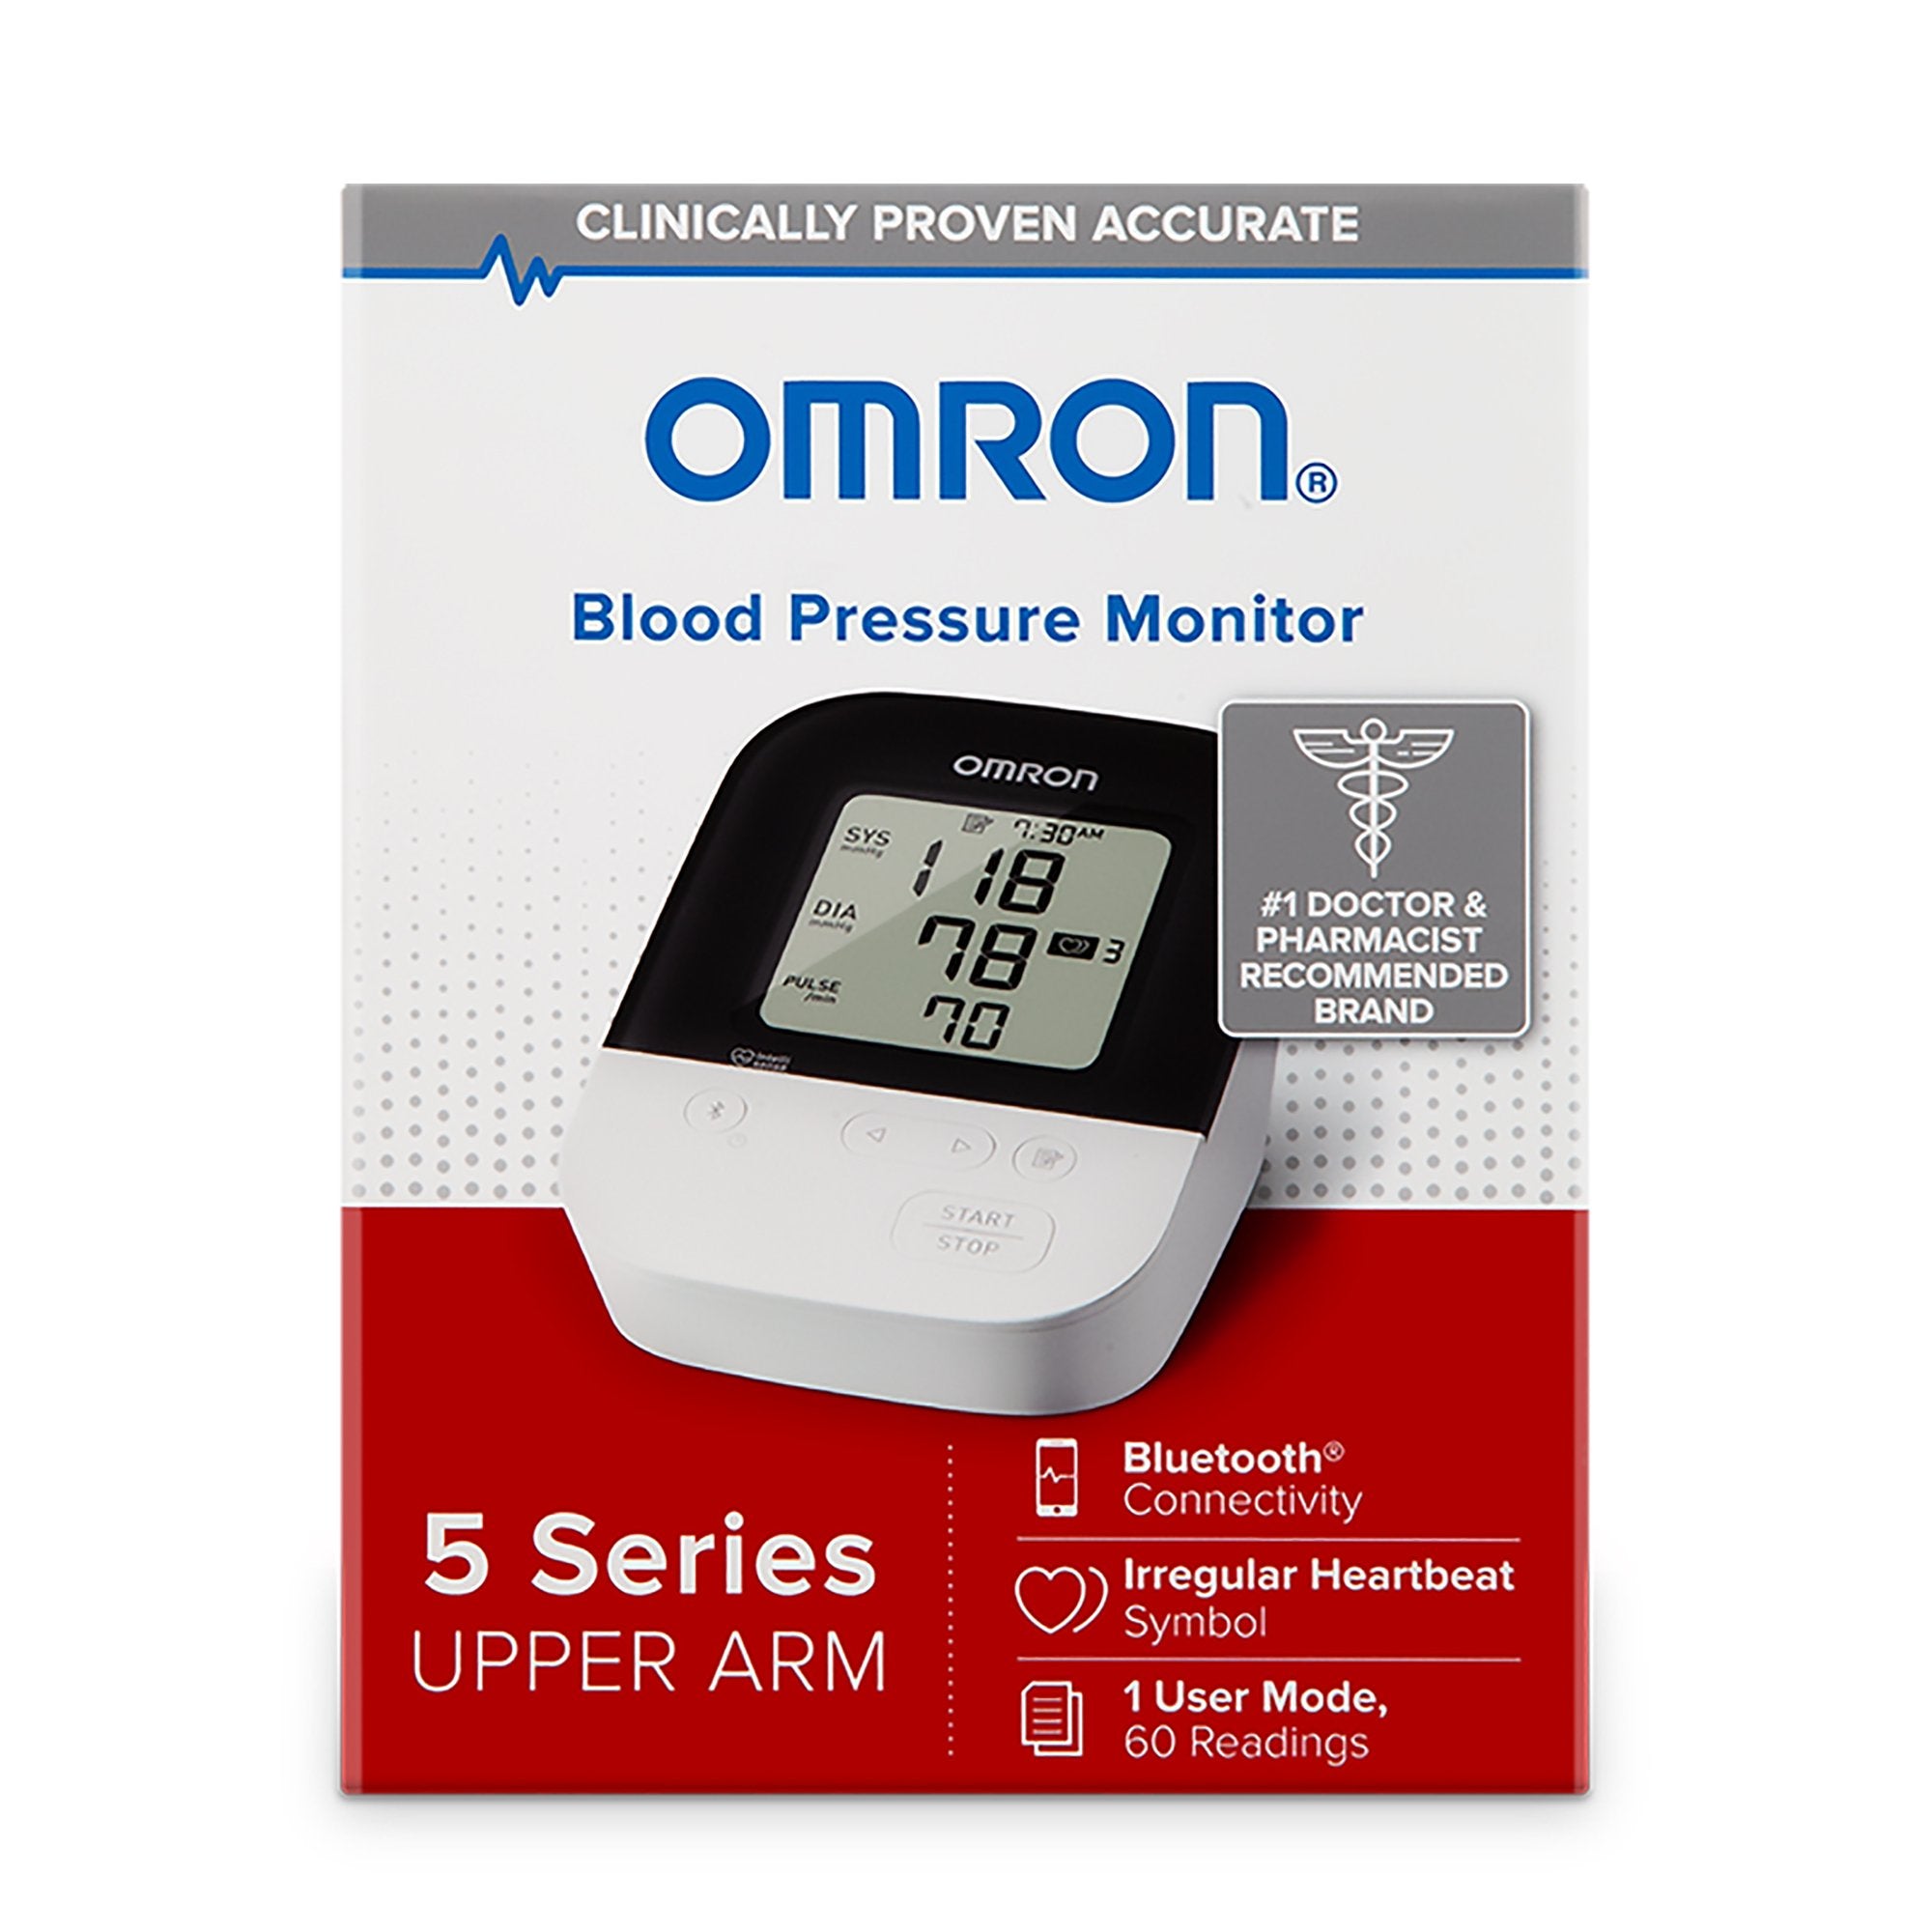 PricePlaza - The OMRON 5 Series Upper Arm home blood pressure monitor is  designed for accuracy and stores 120 blood pressure readings for two users  (60 per user), and includes a wide-range